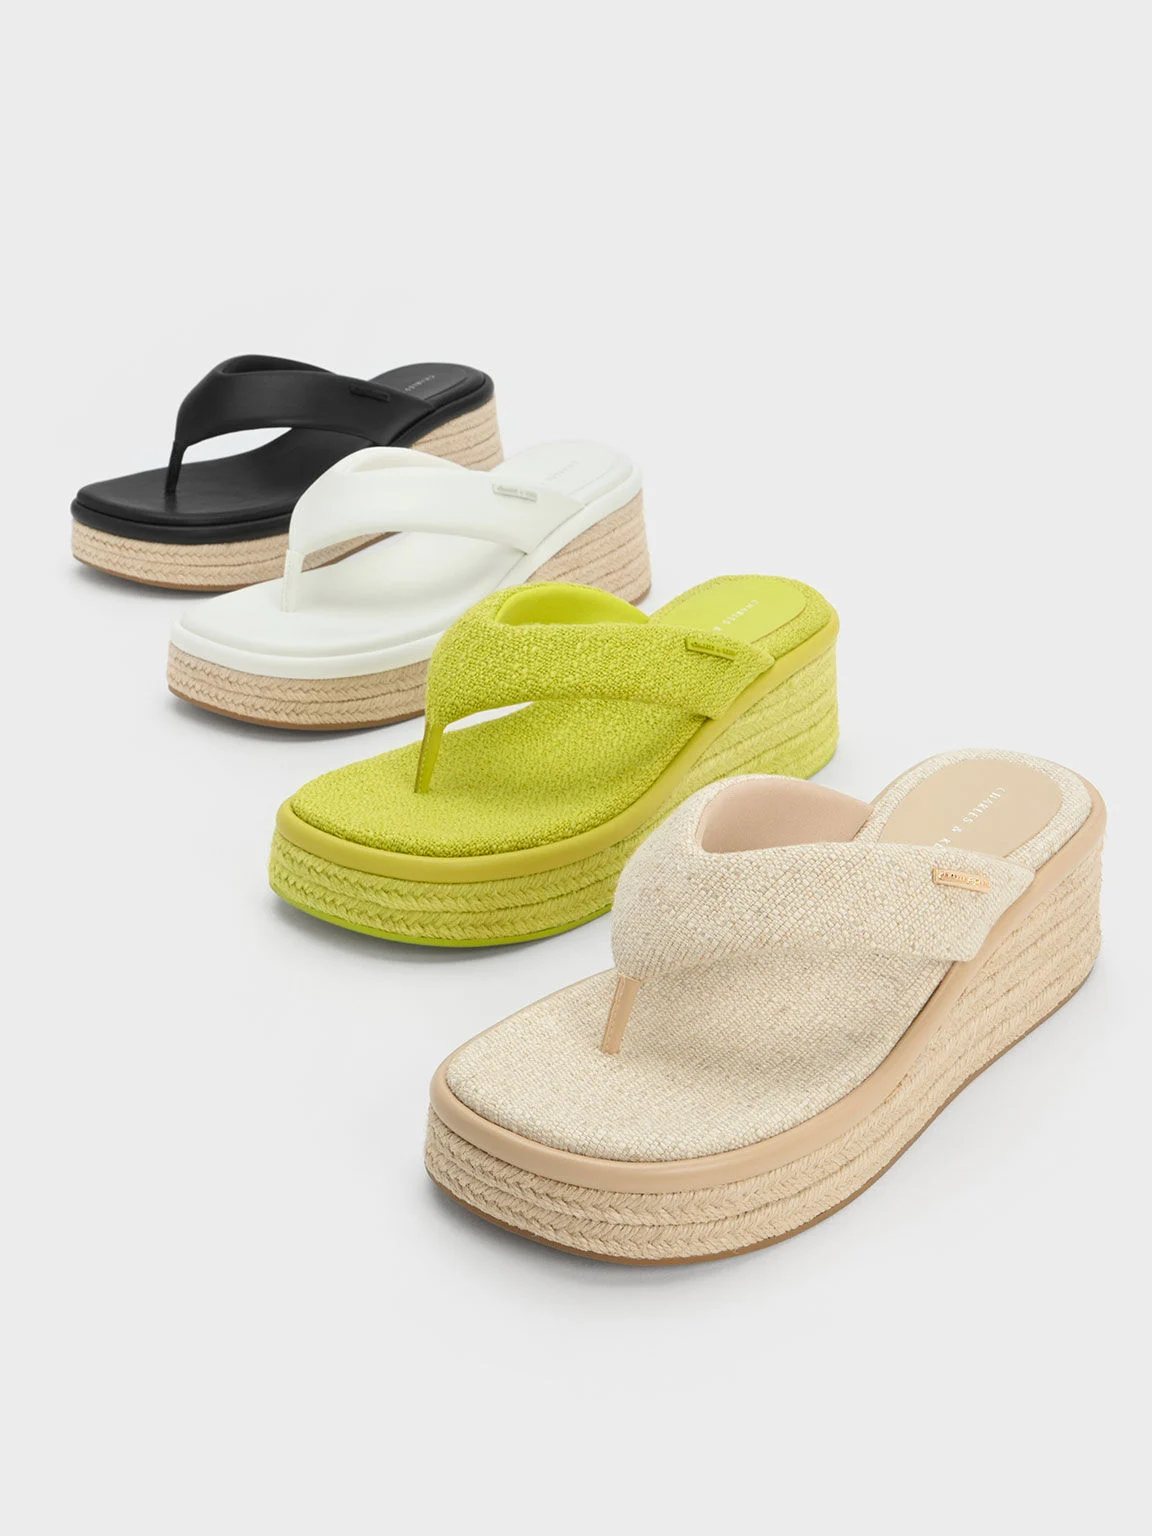 Women’s linen espadrille thong sandals - CHARLES & KEITH